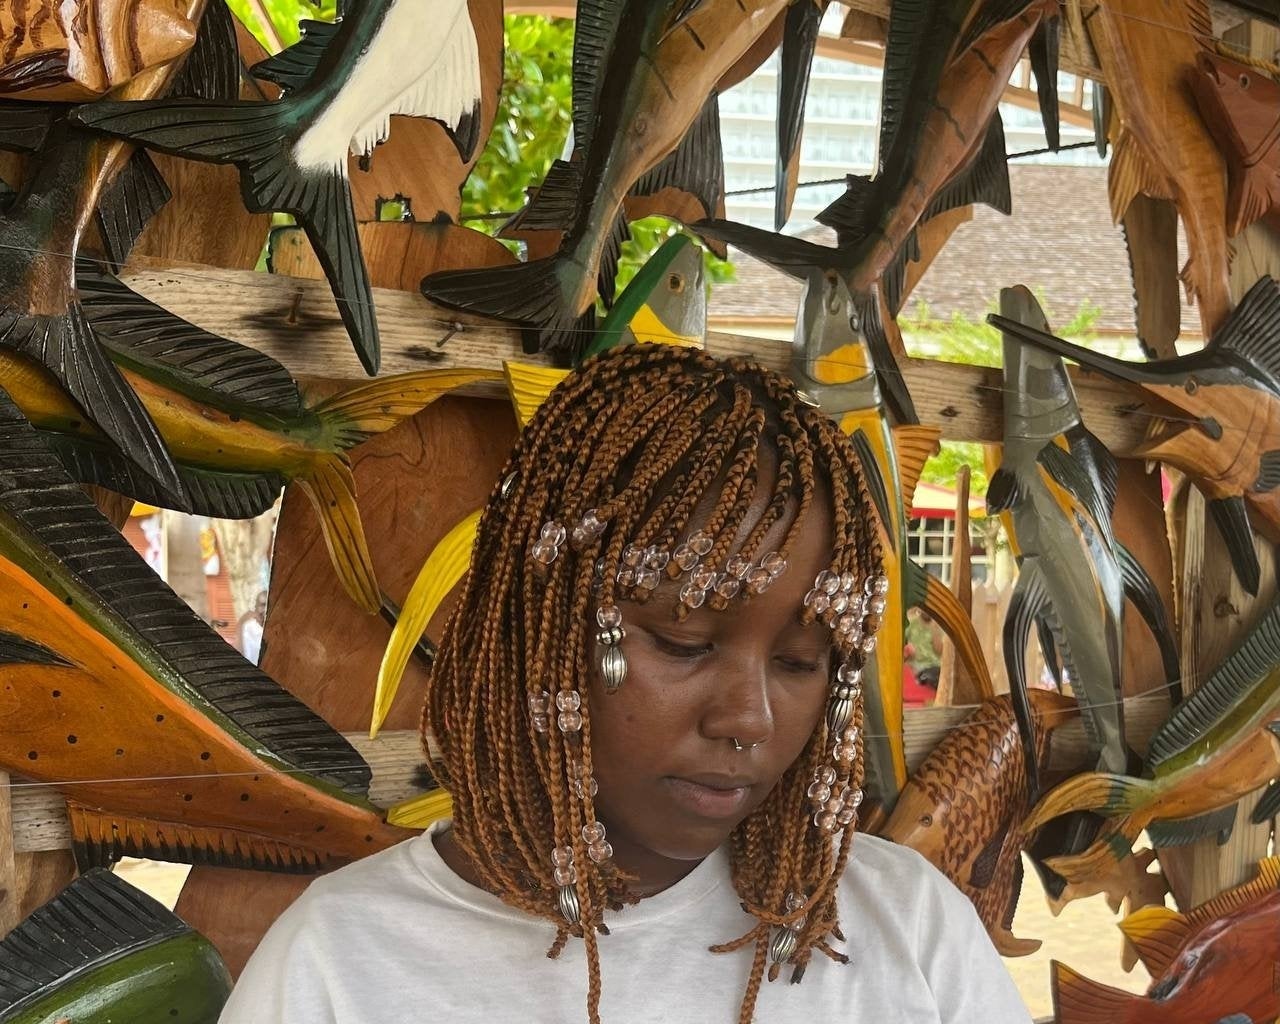 Woman with braided hair and beads, wearing a graphic tee, in front of a background with wooden bird sculptures